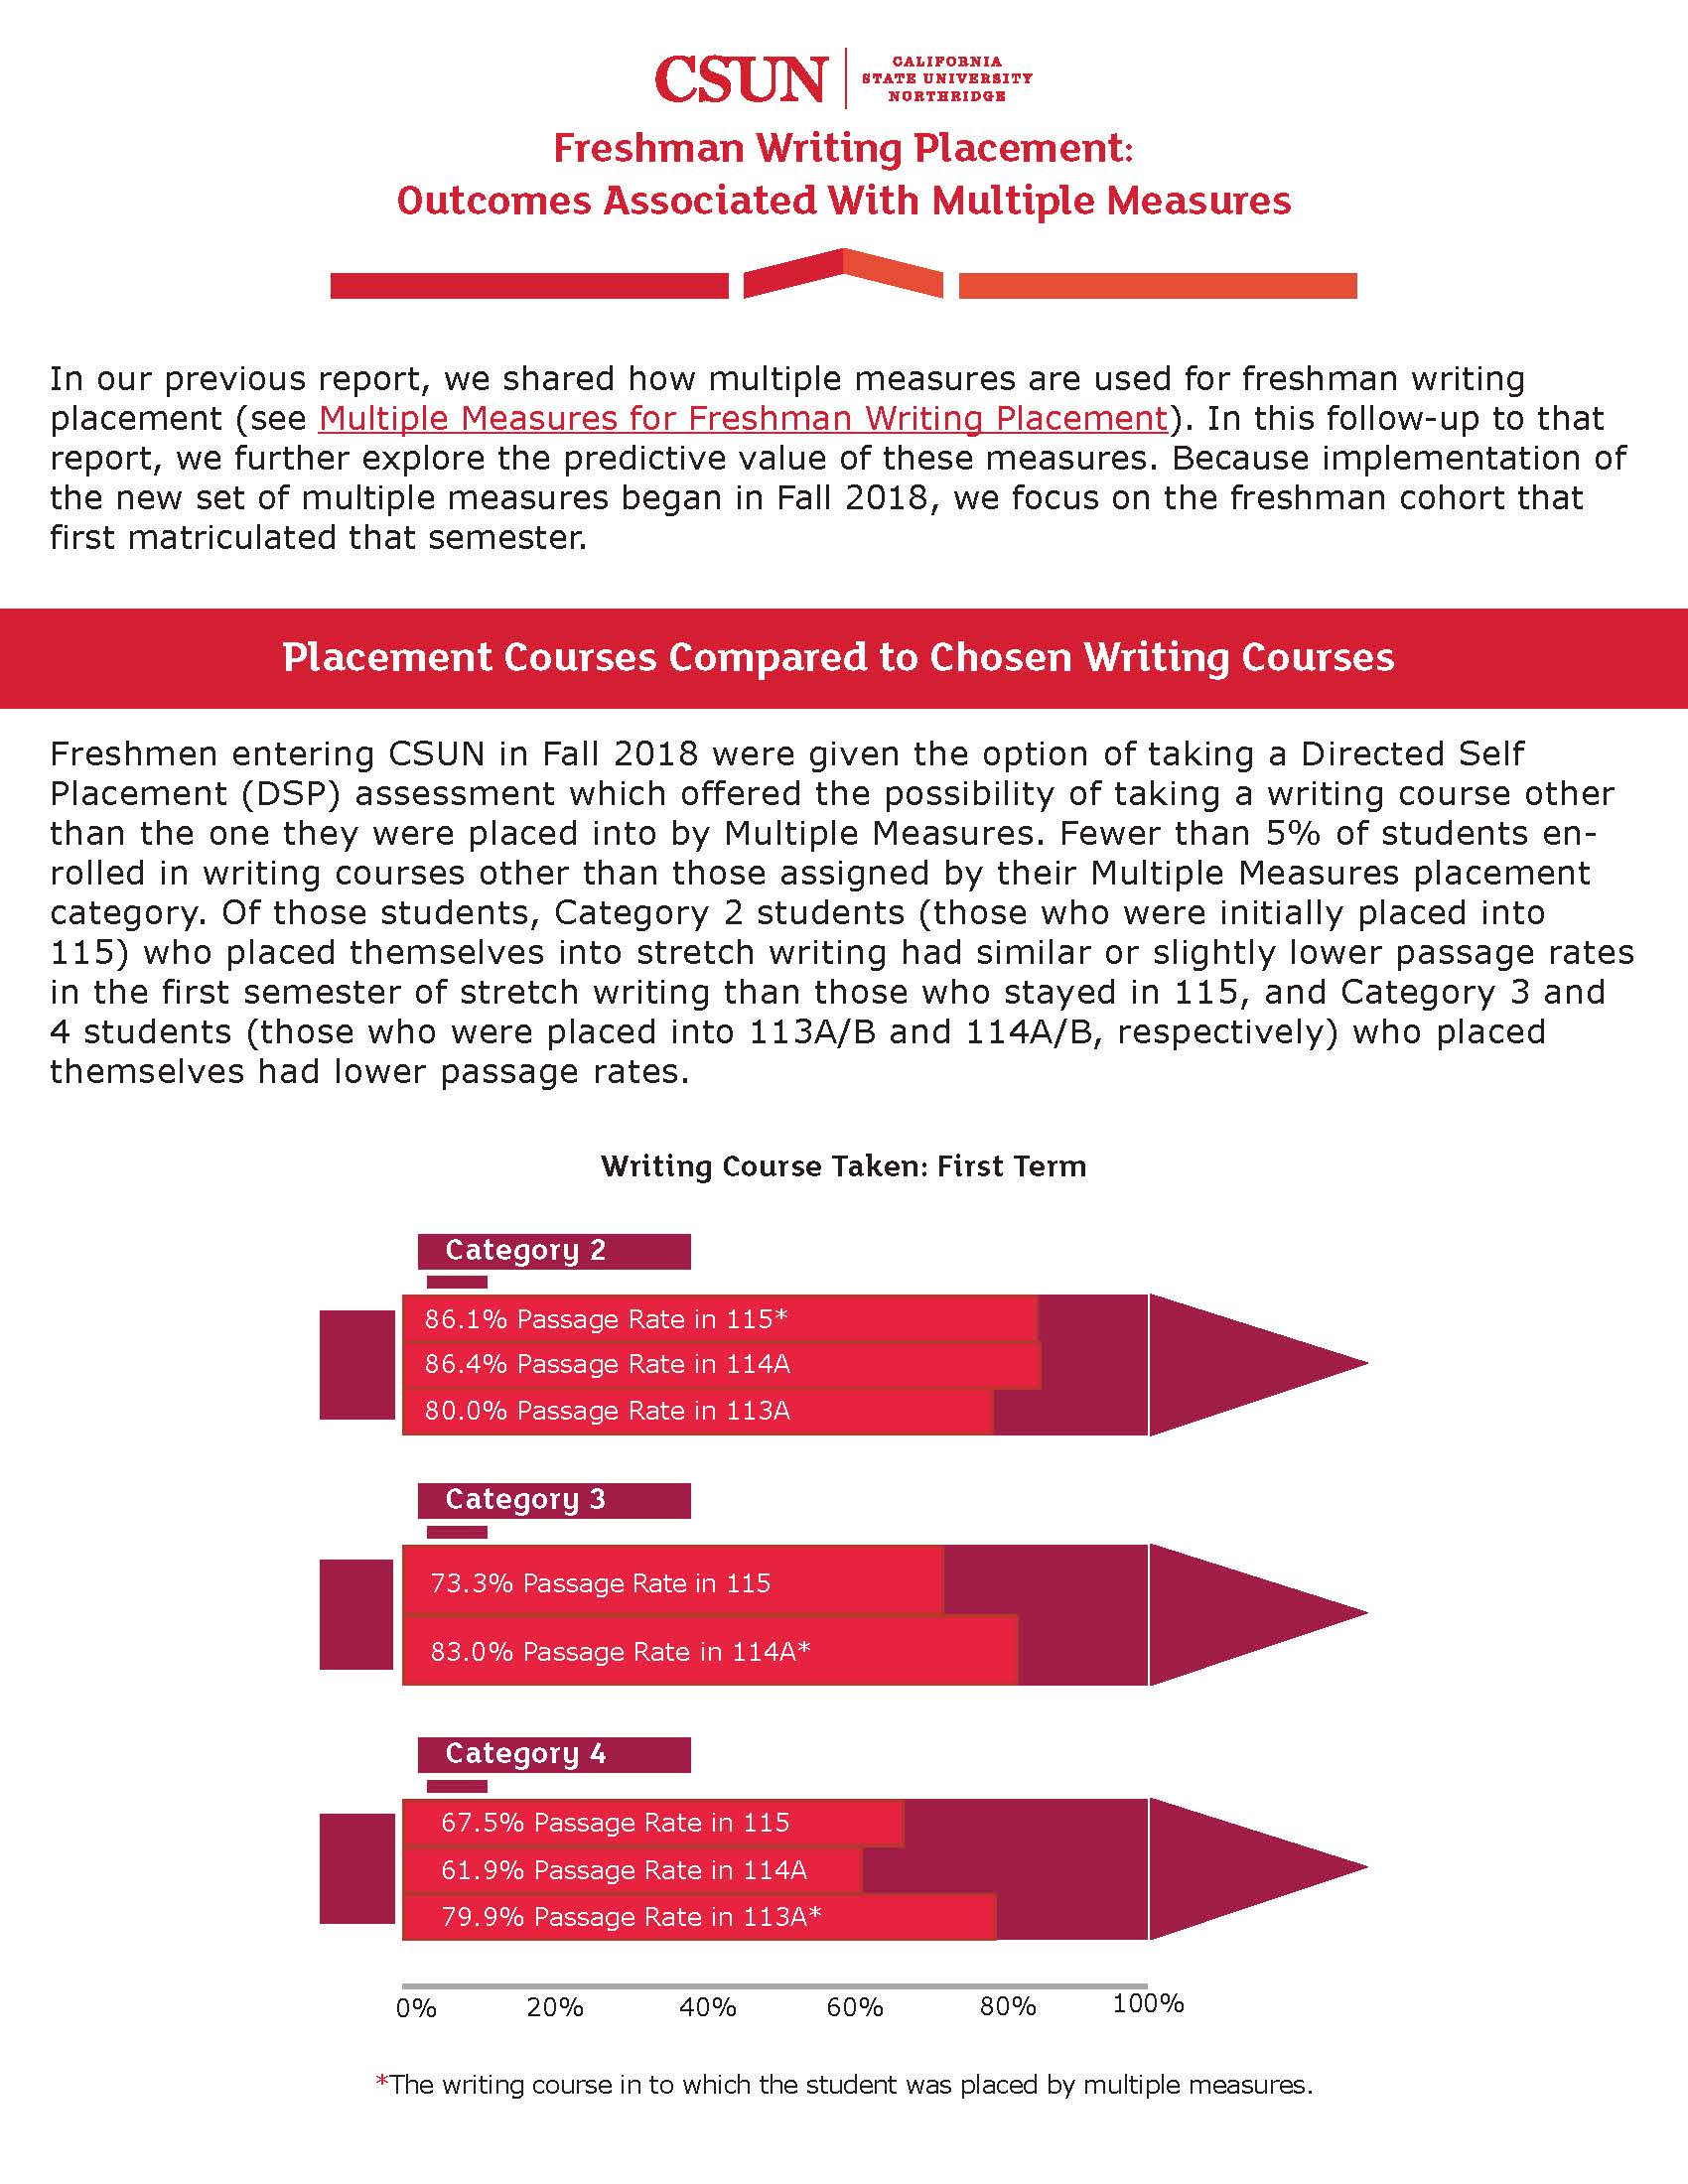 Freshman Writing Placement: Outcomes Associated With Multiple Measures